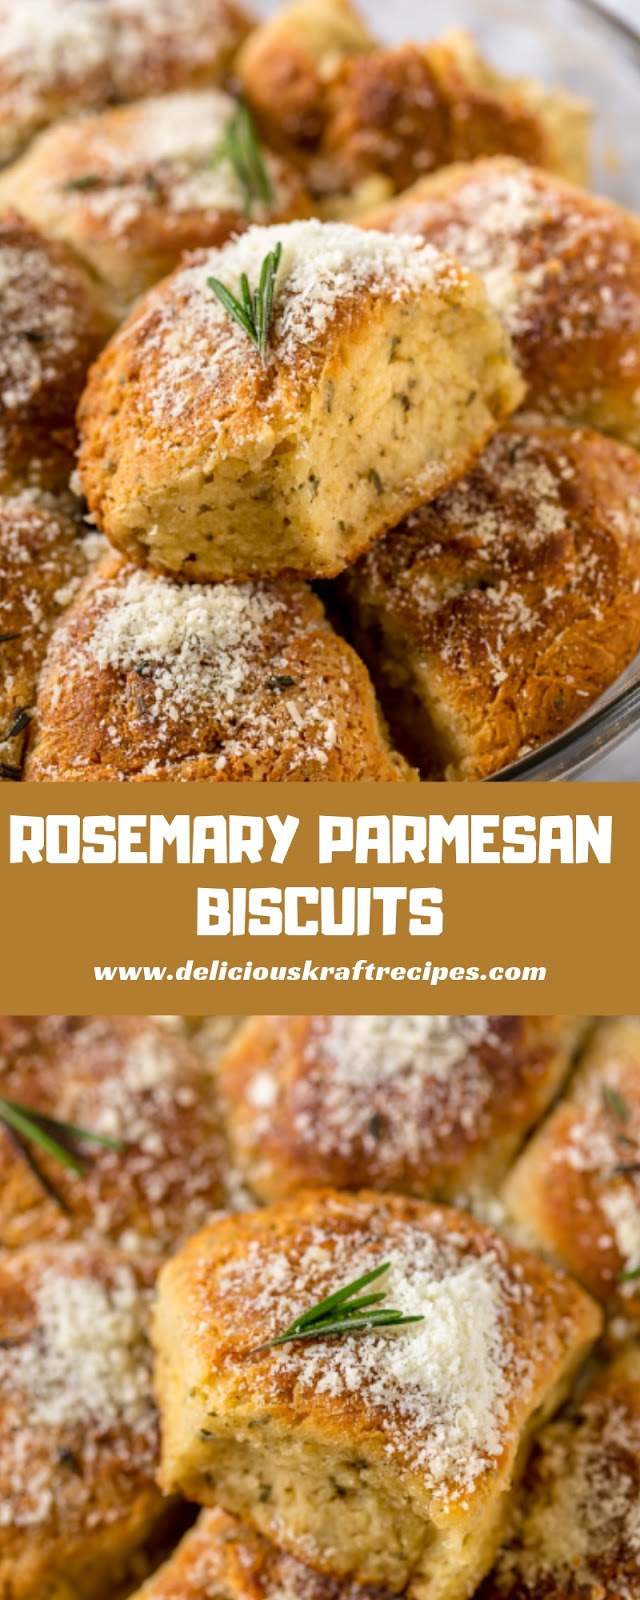 ROSEMARY PARMESAN BISCUITS